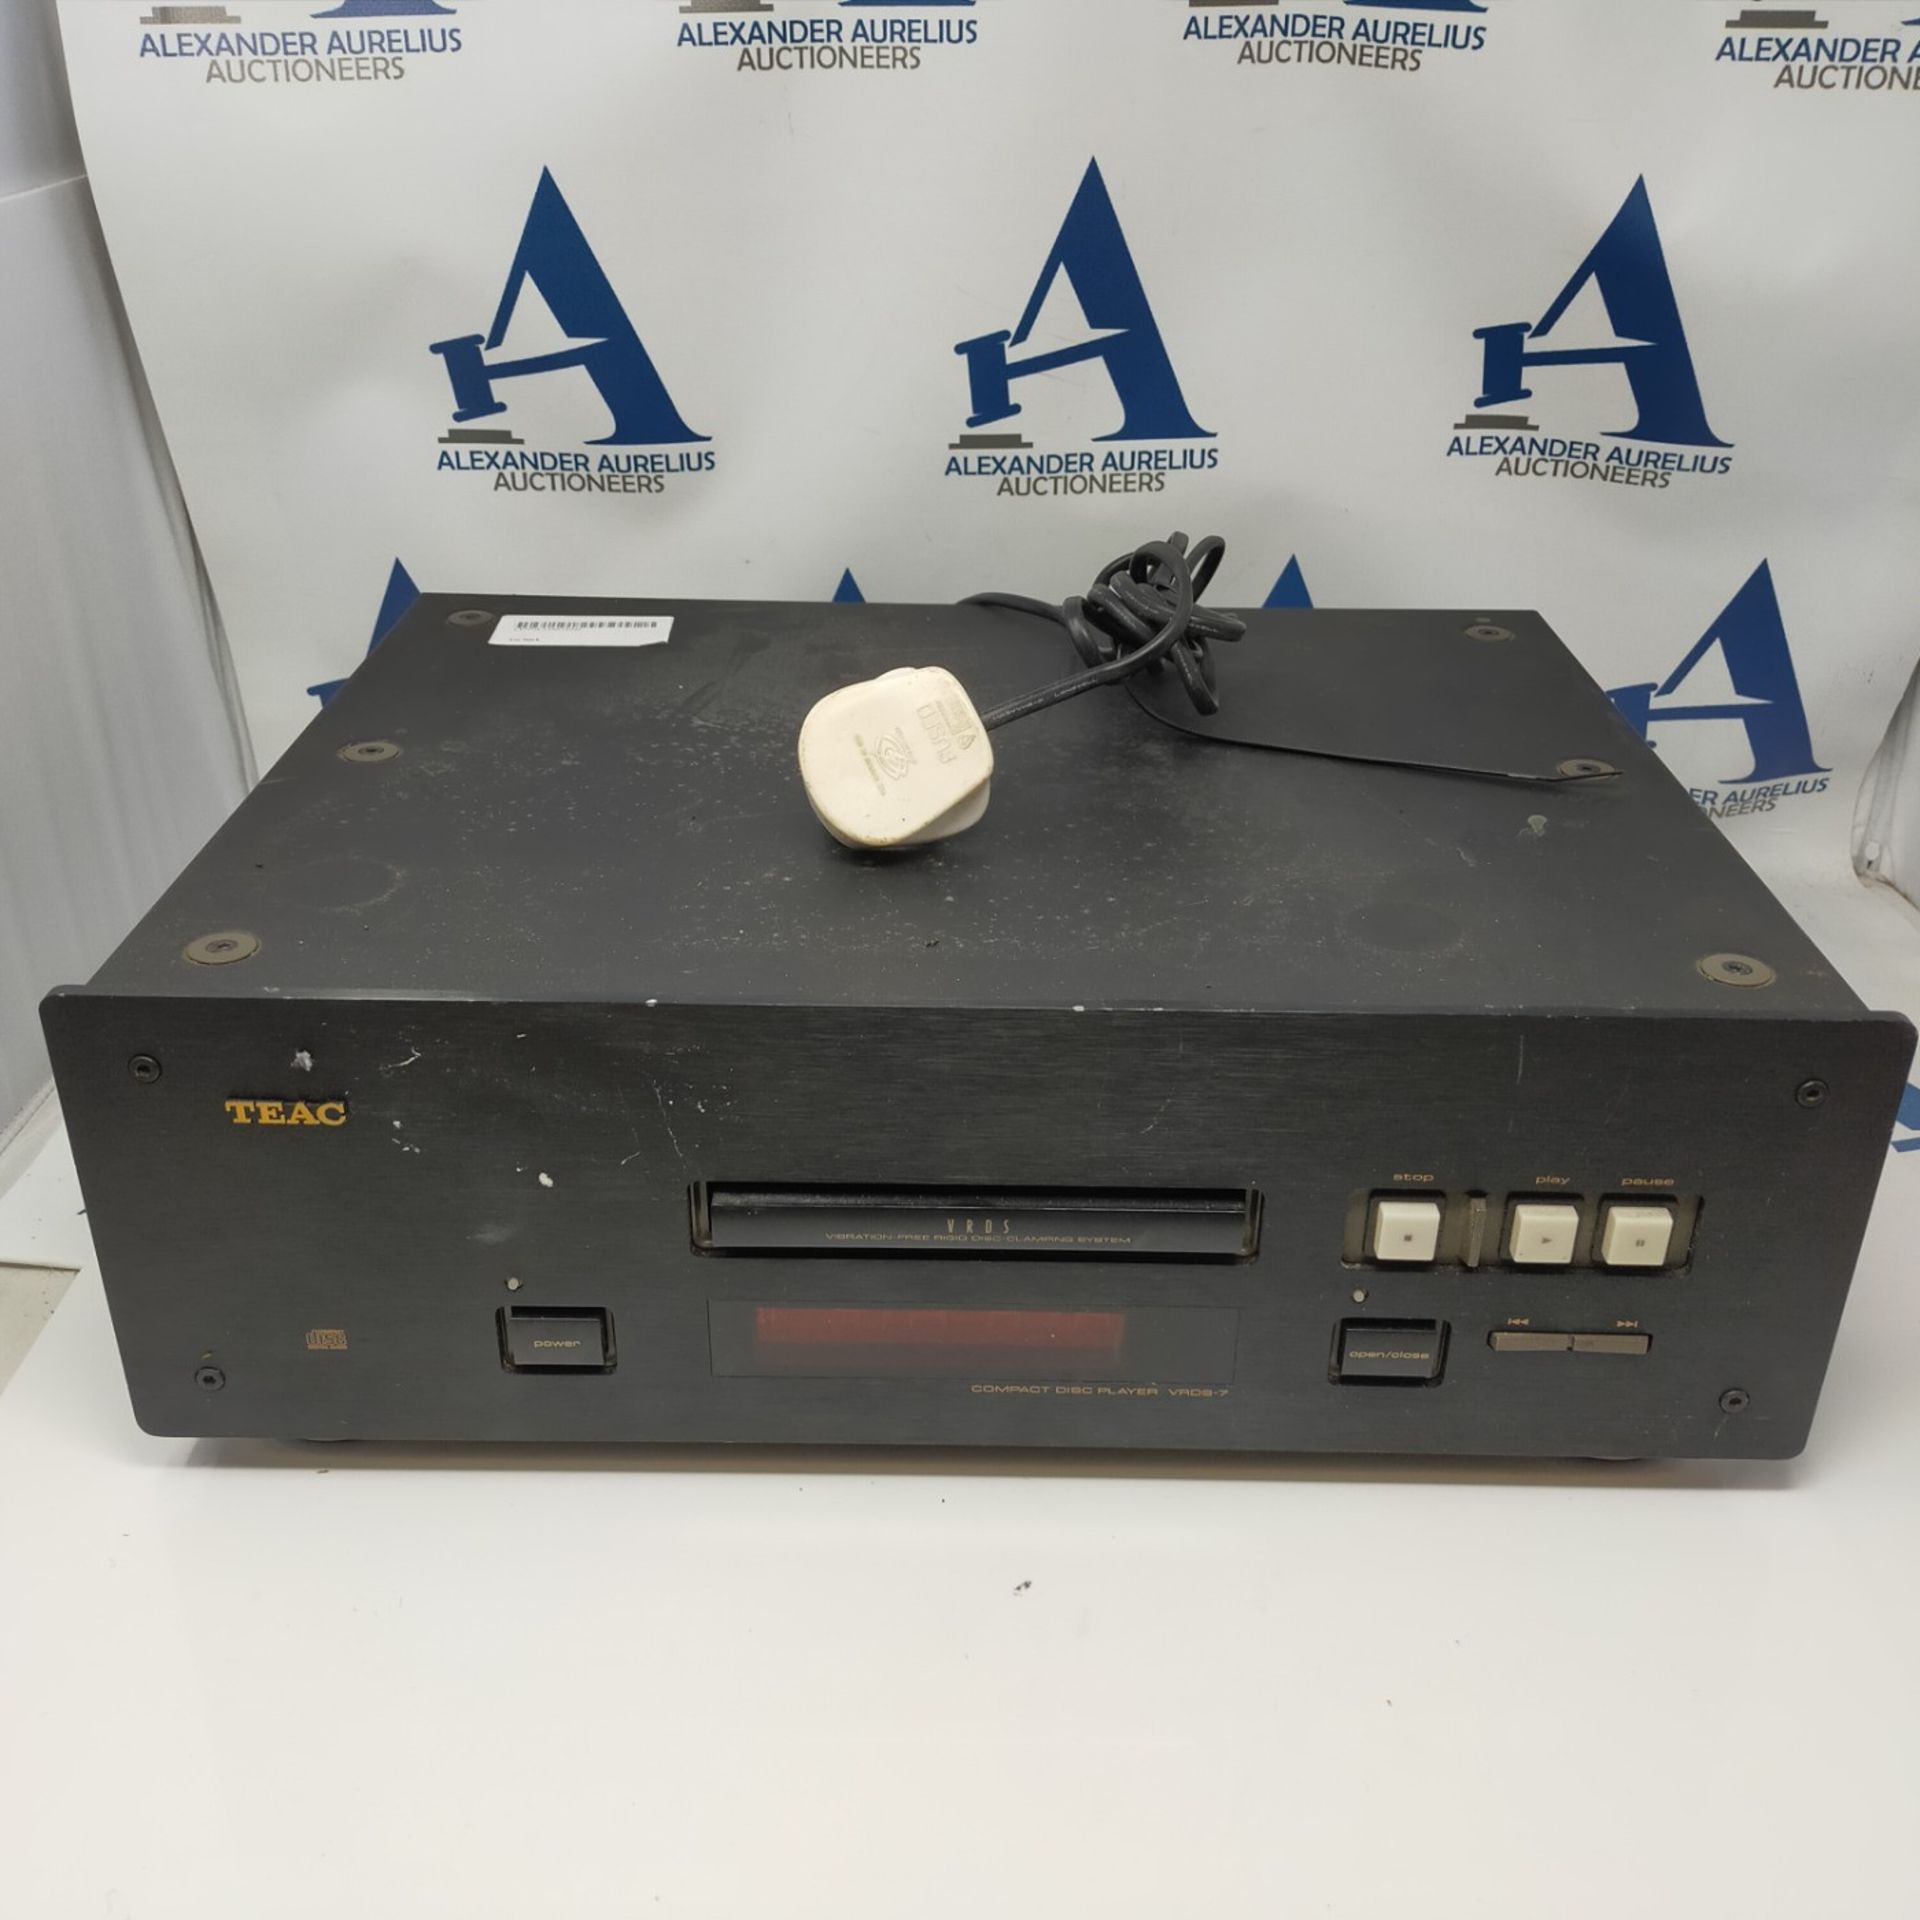 TEAC VRDS 7 CLASSIC CD PLAYER